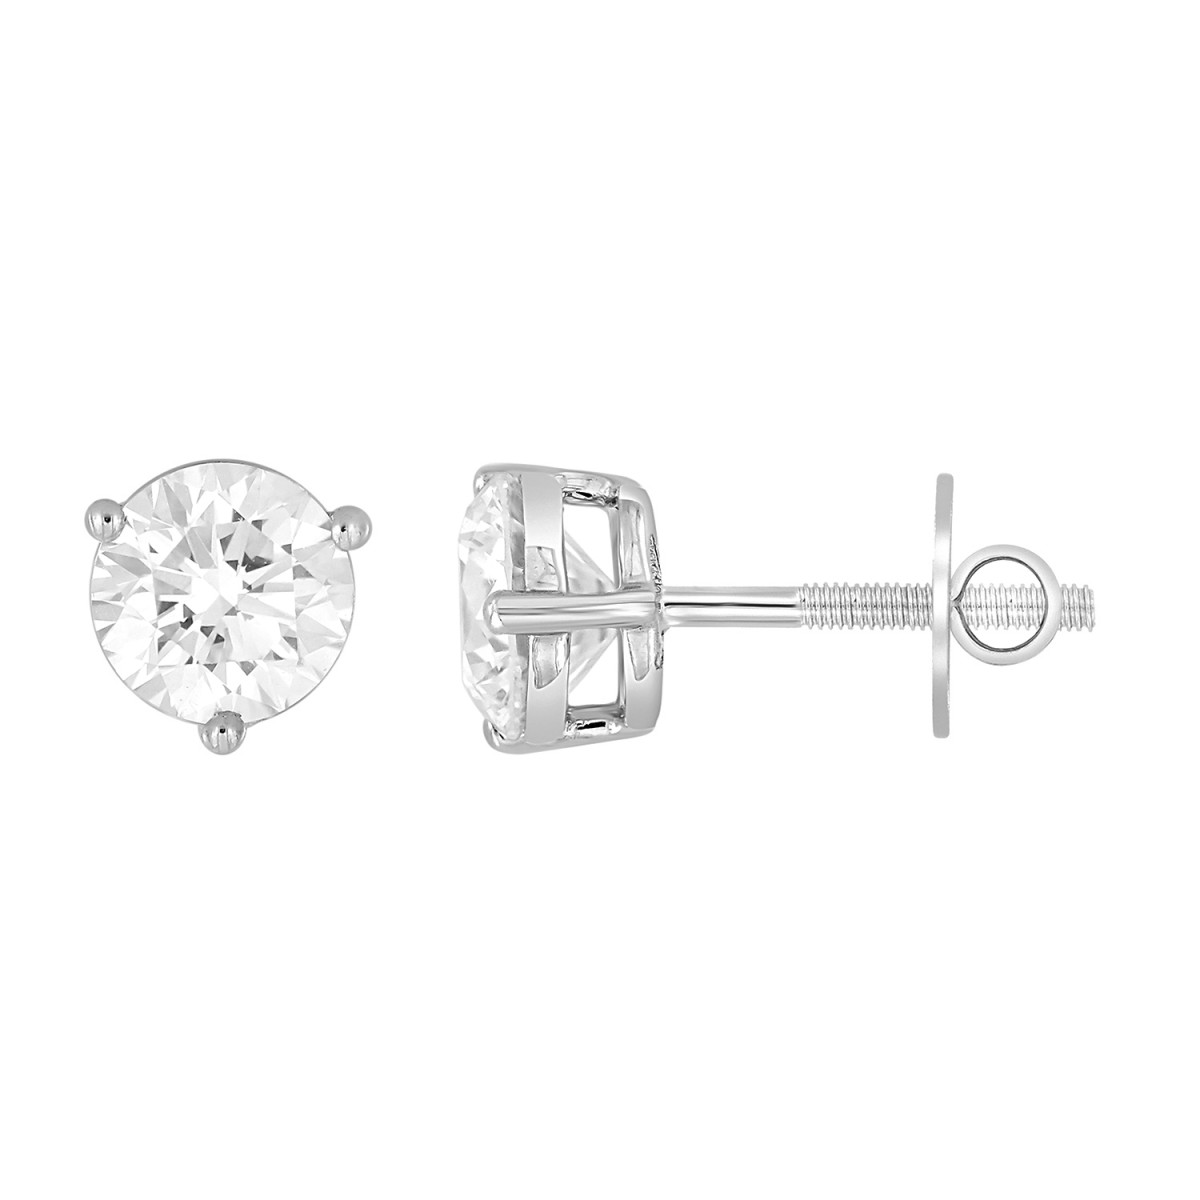 18K WHITE GOLD 1/4CT ROUND DIAMOND LADIES SOLITAIRE EARRINGS 